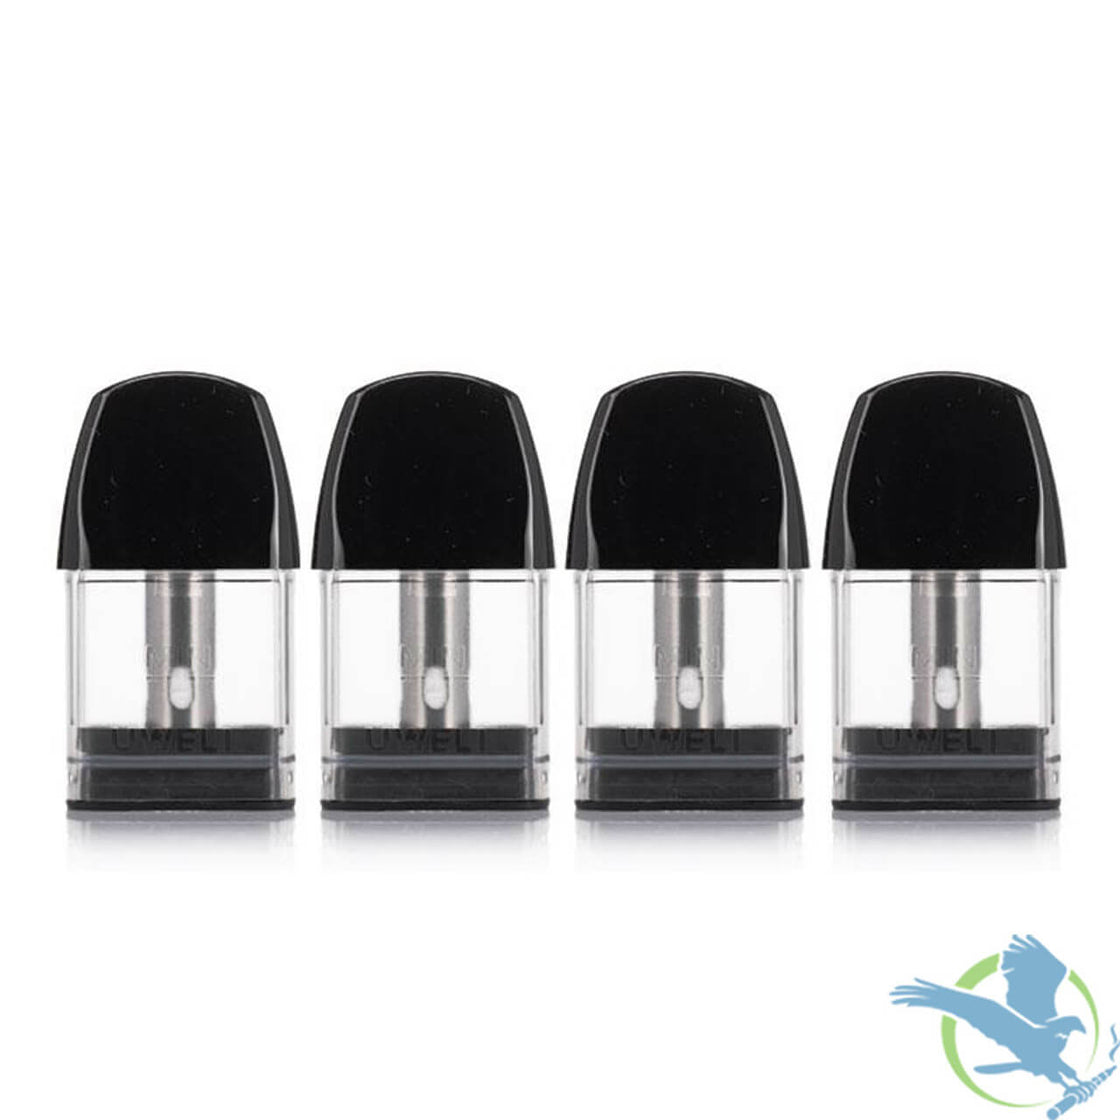 Uwell CALIBURN A2 2ML Refillable Replacement Pod - Pack of 4